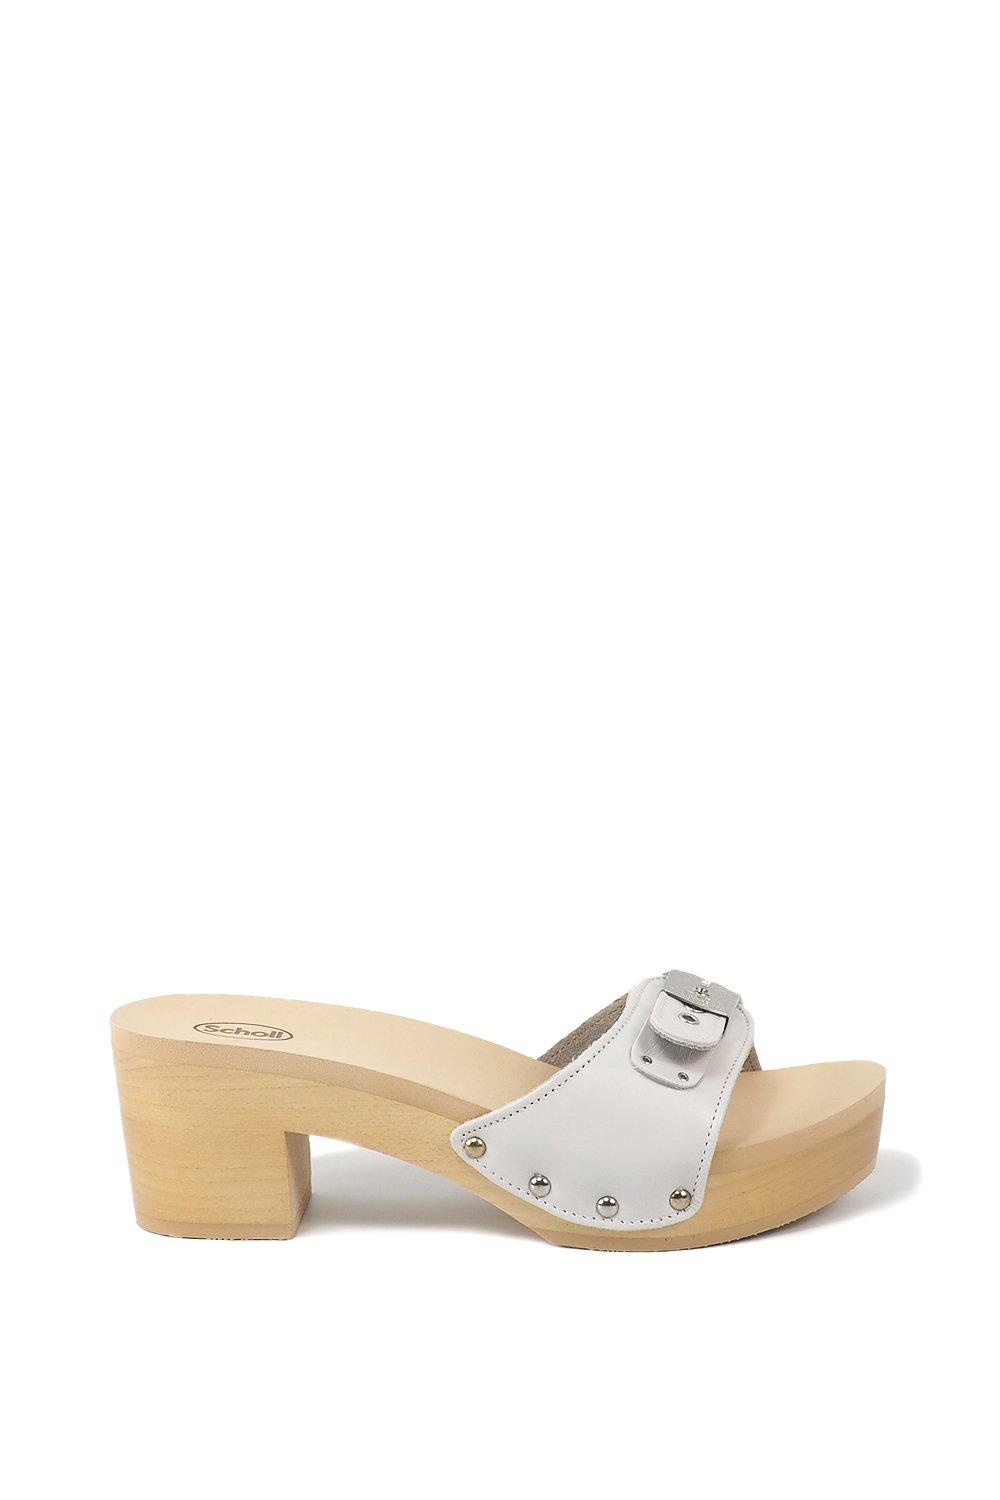 Sandals | 'Pescura Ibiza' White Leather & wooden Heeled Sandal | Scholl